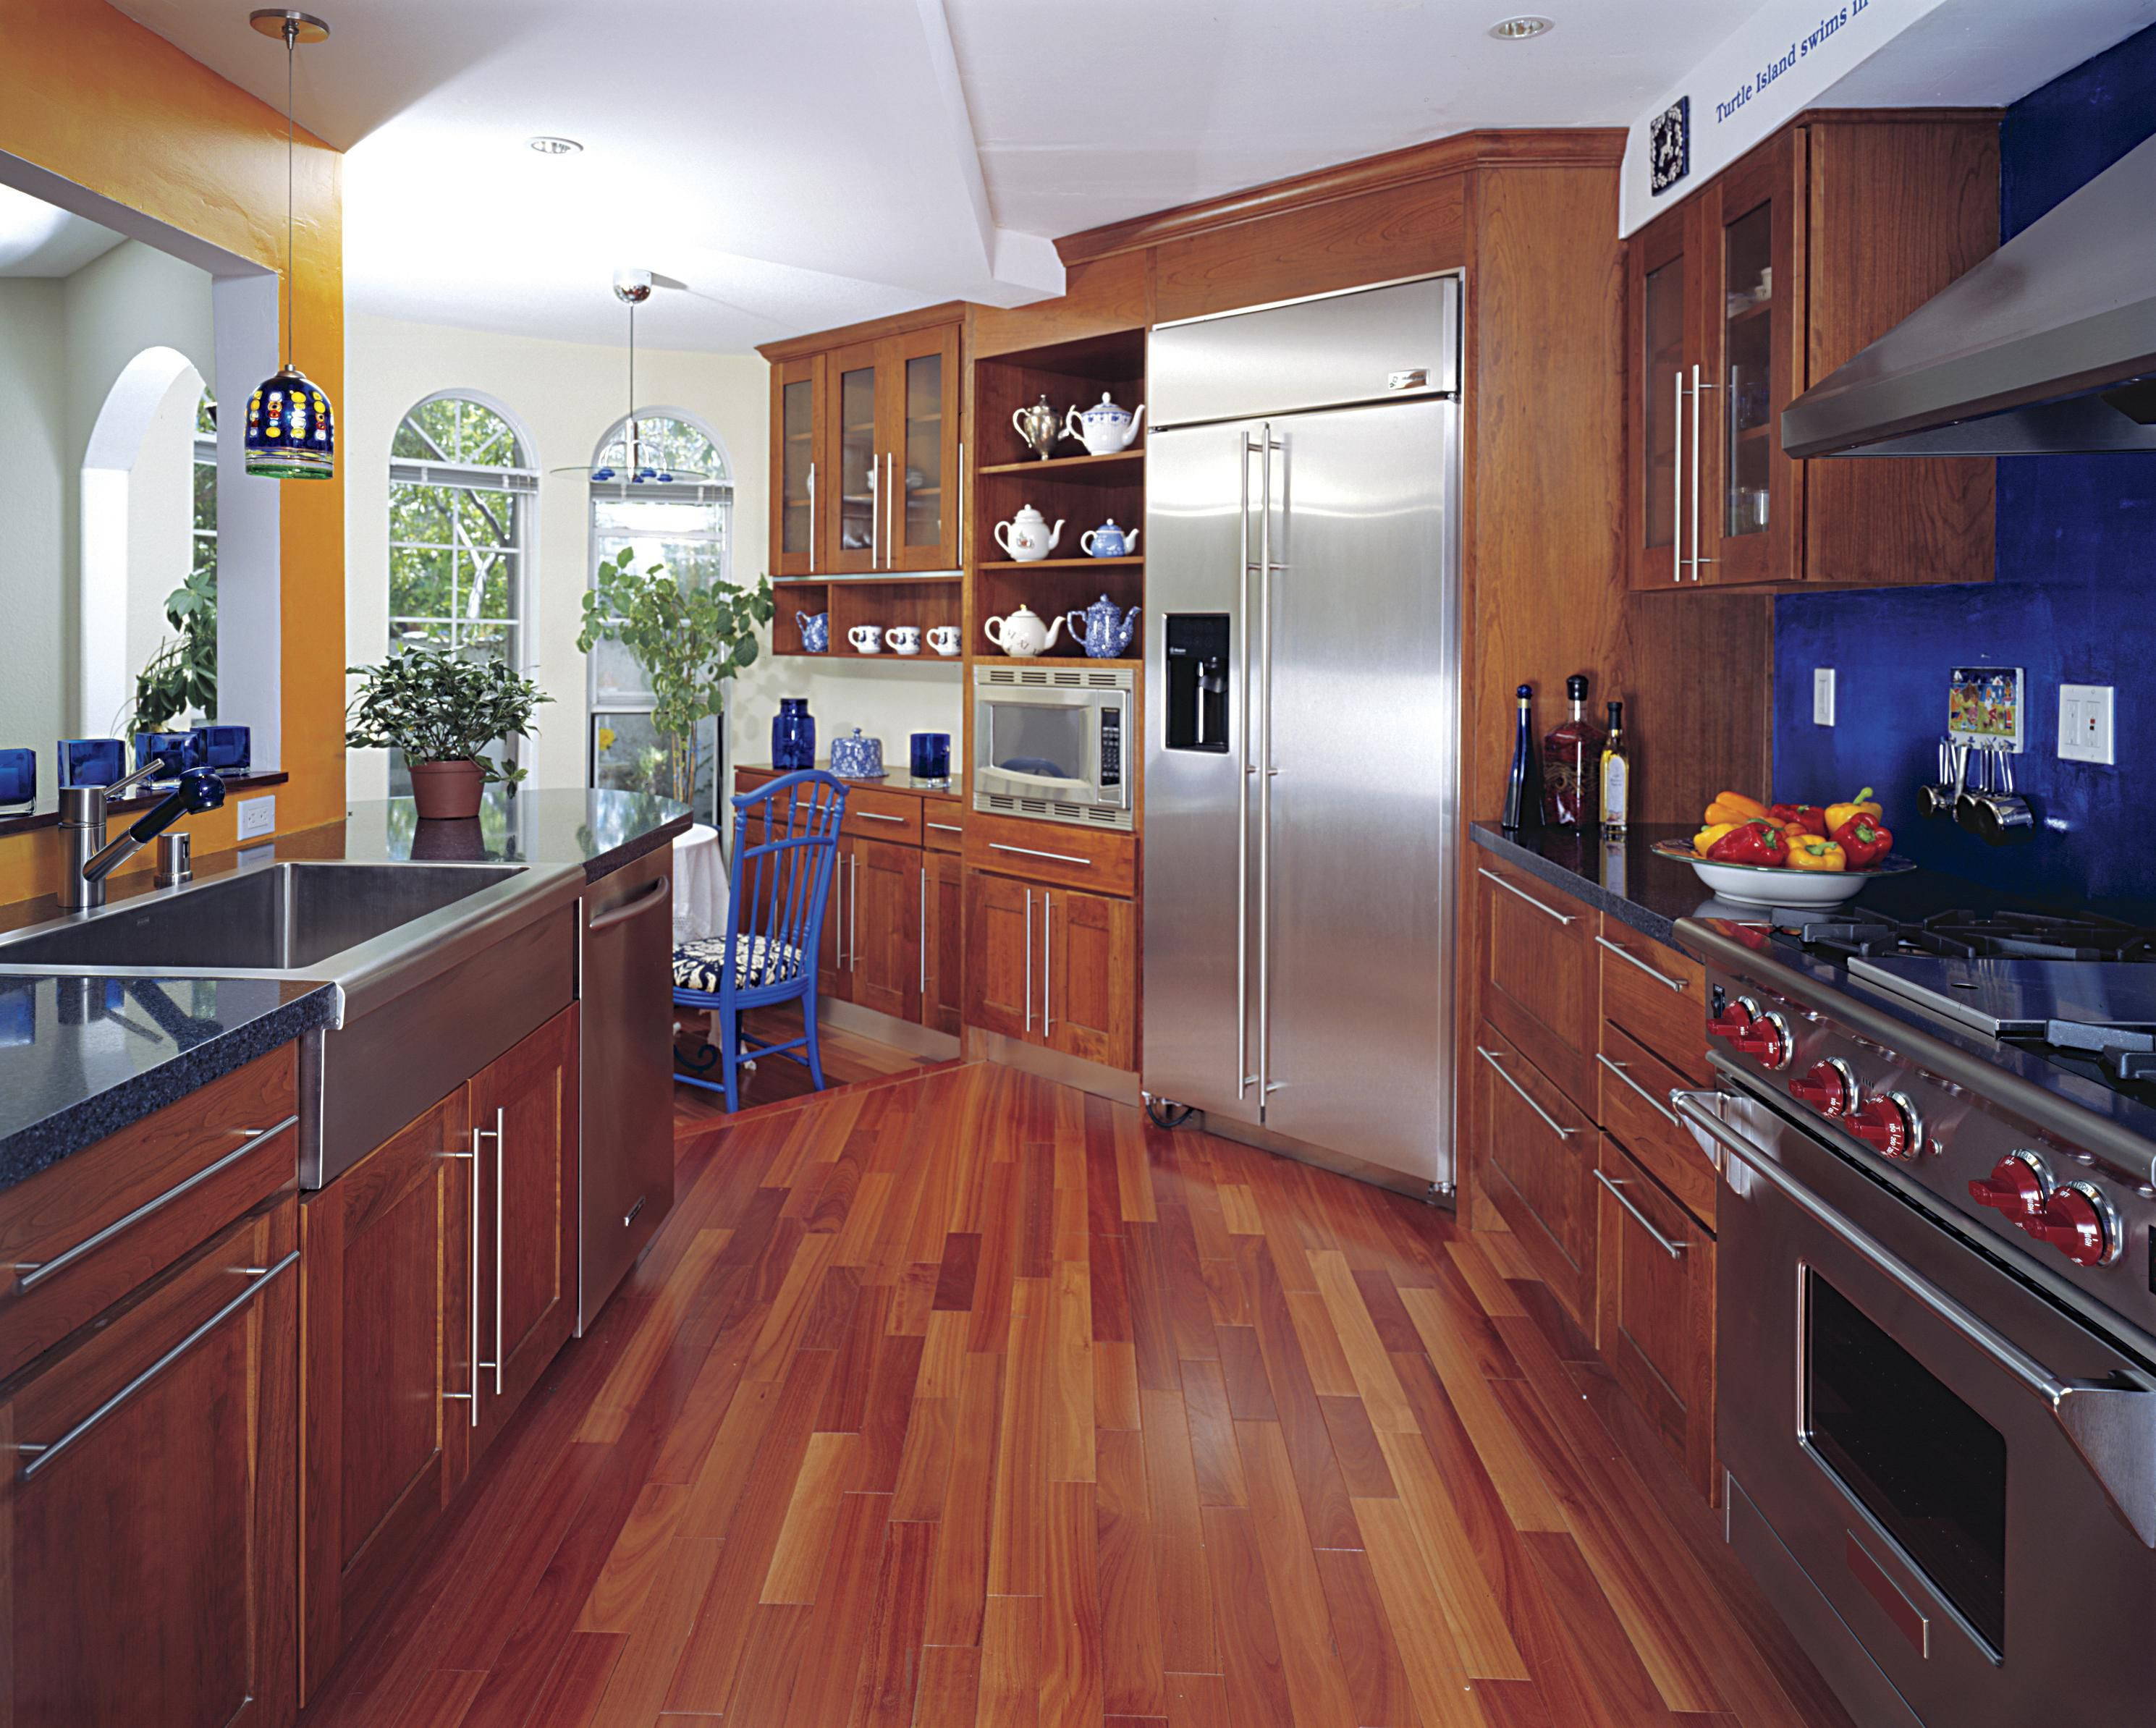 Dark Hardwood Vs Light Hardwood Floors Of Hardwood Floor In A Kitchen Is This Allowed Within 186828472 56a49f3a5f9b58b7d0d7e142 